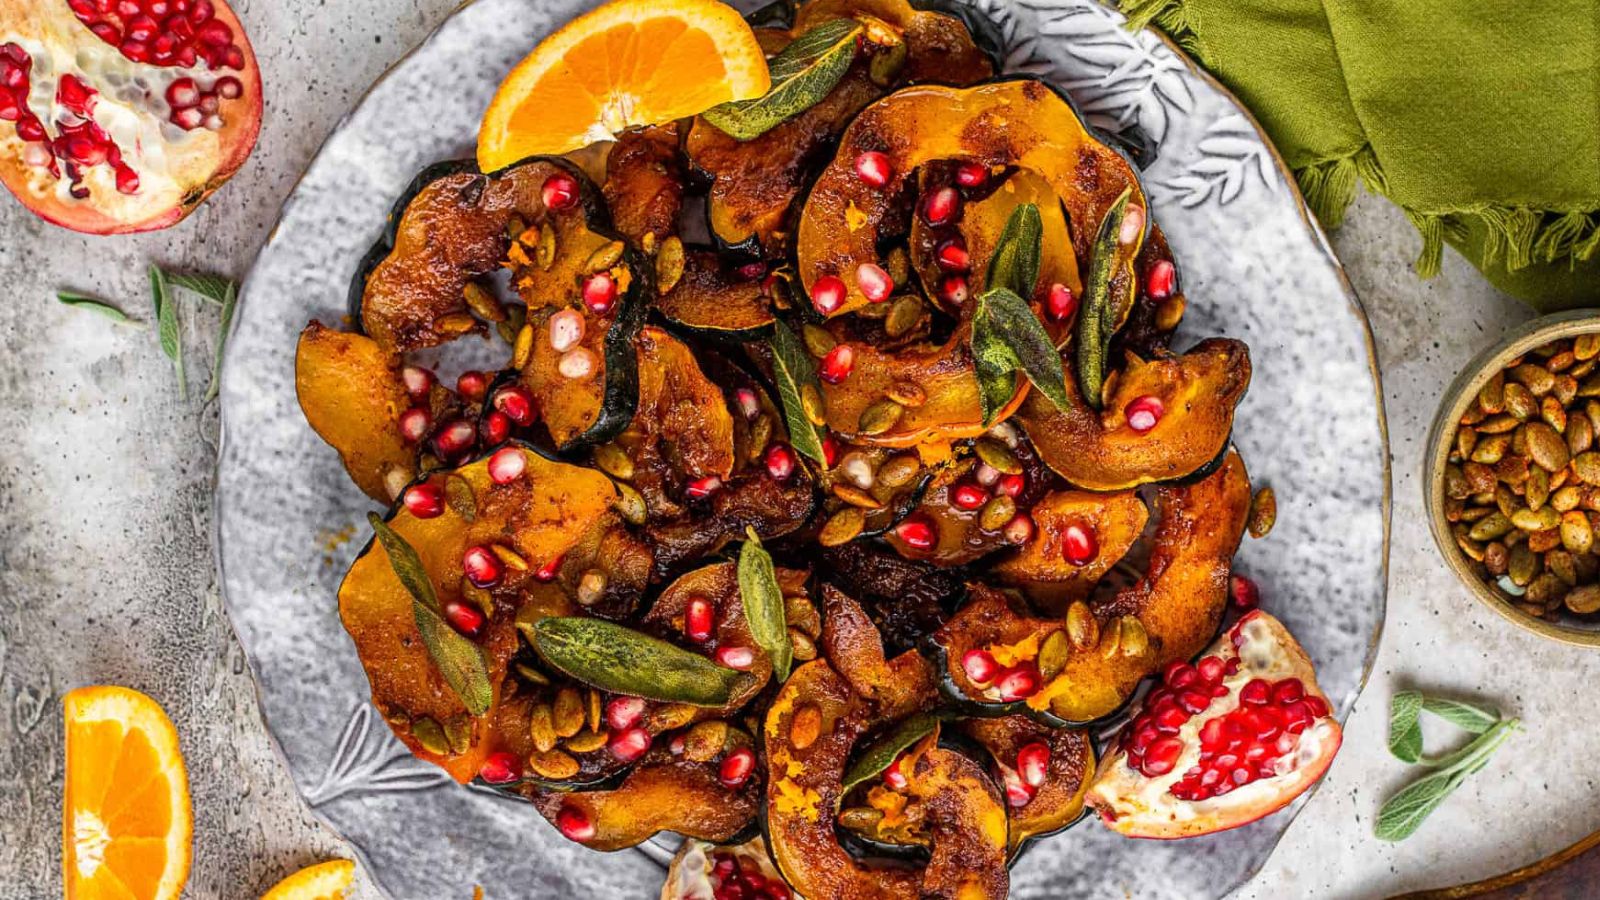 <p>This Roasted Acorn Squash is a beautiful and delicious side dish. Sliced acorn squash is oven roasted in a sweet and spicy buttery sauce, then topped with toasted pumpkin seeds, pomegranate arils, and orange zest for a holiday table showstopper!</p>